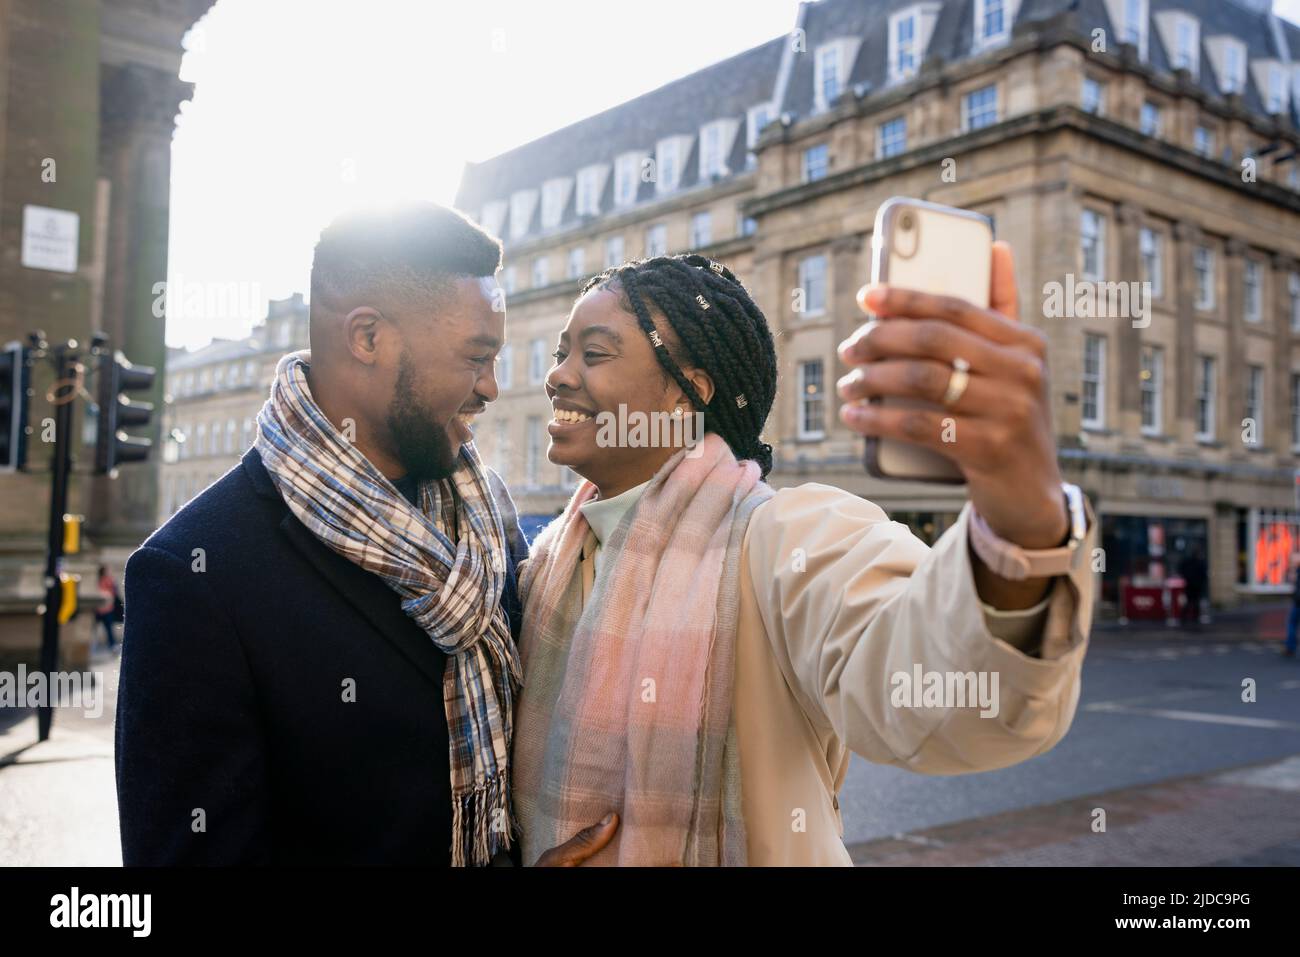 Cheerful couple smiling face to face in town, woman holding phone taking selfie Stock Photo